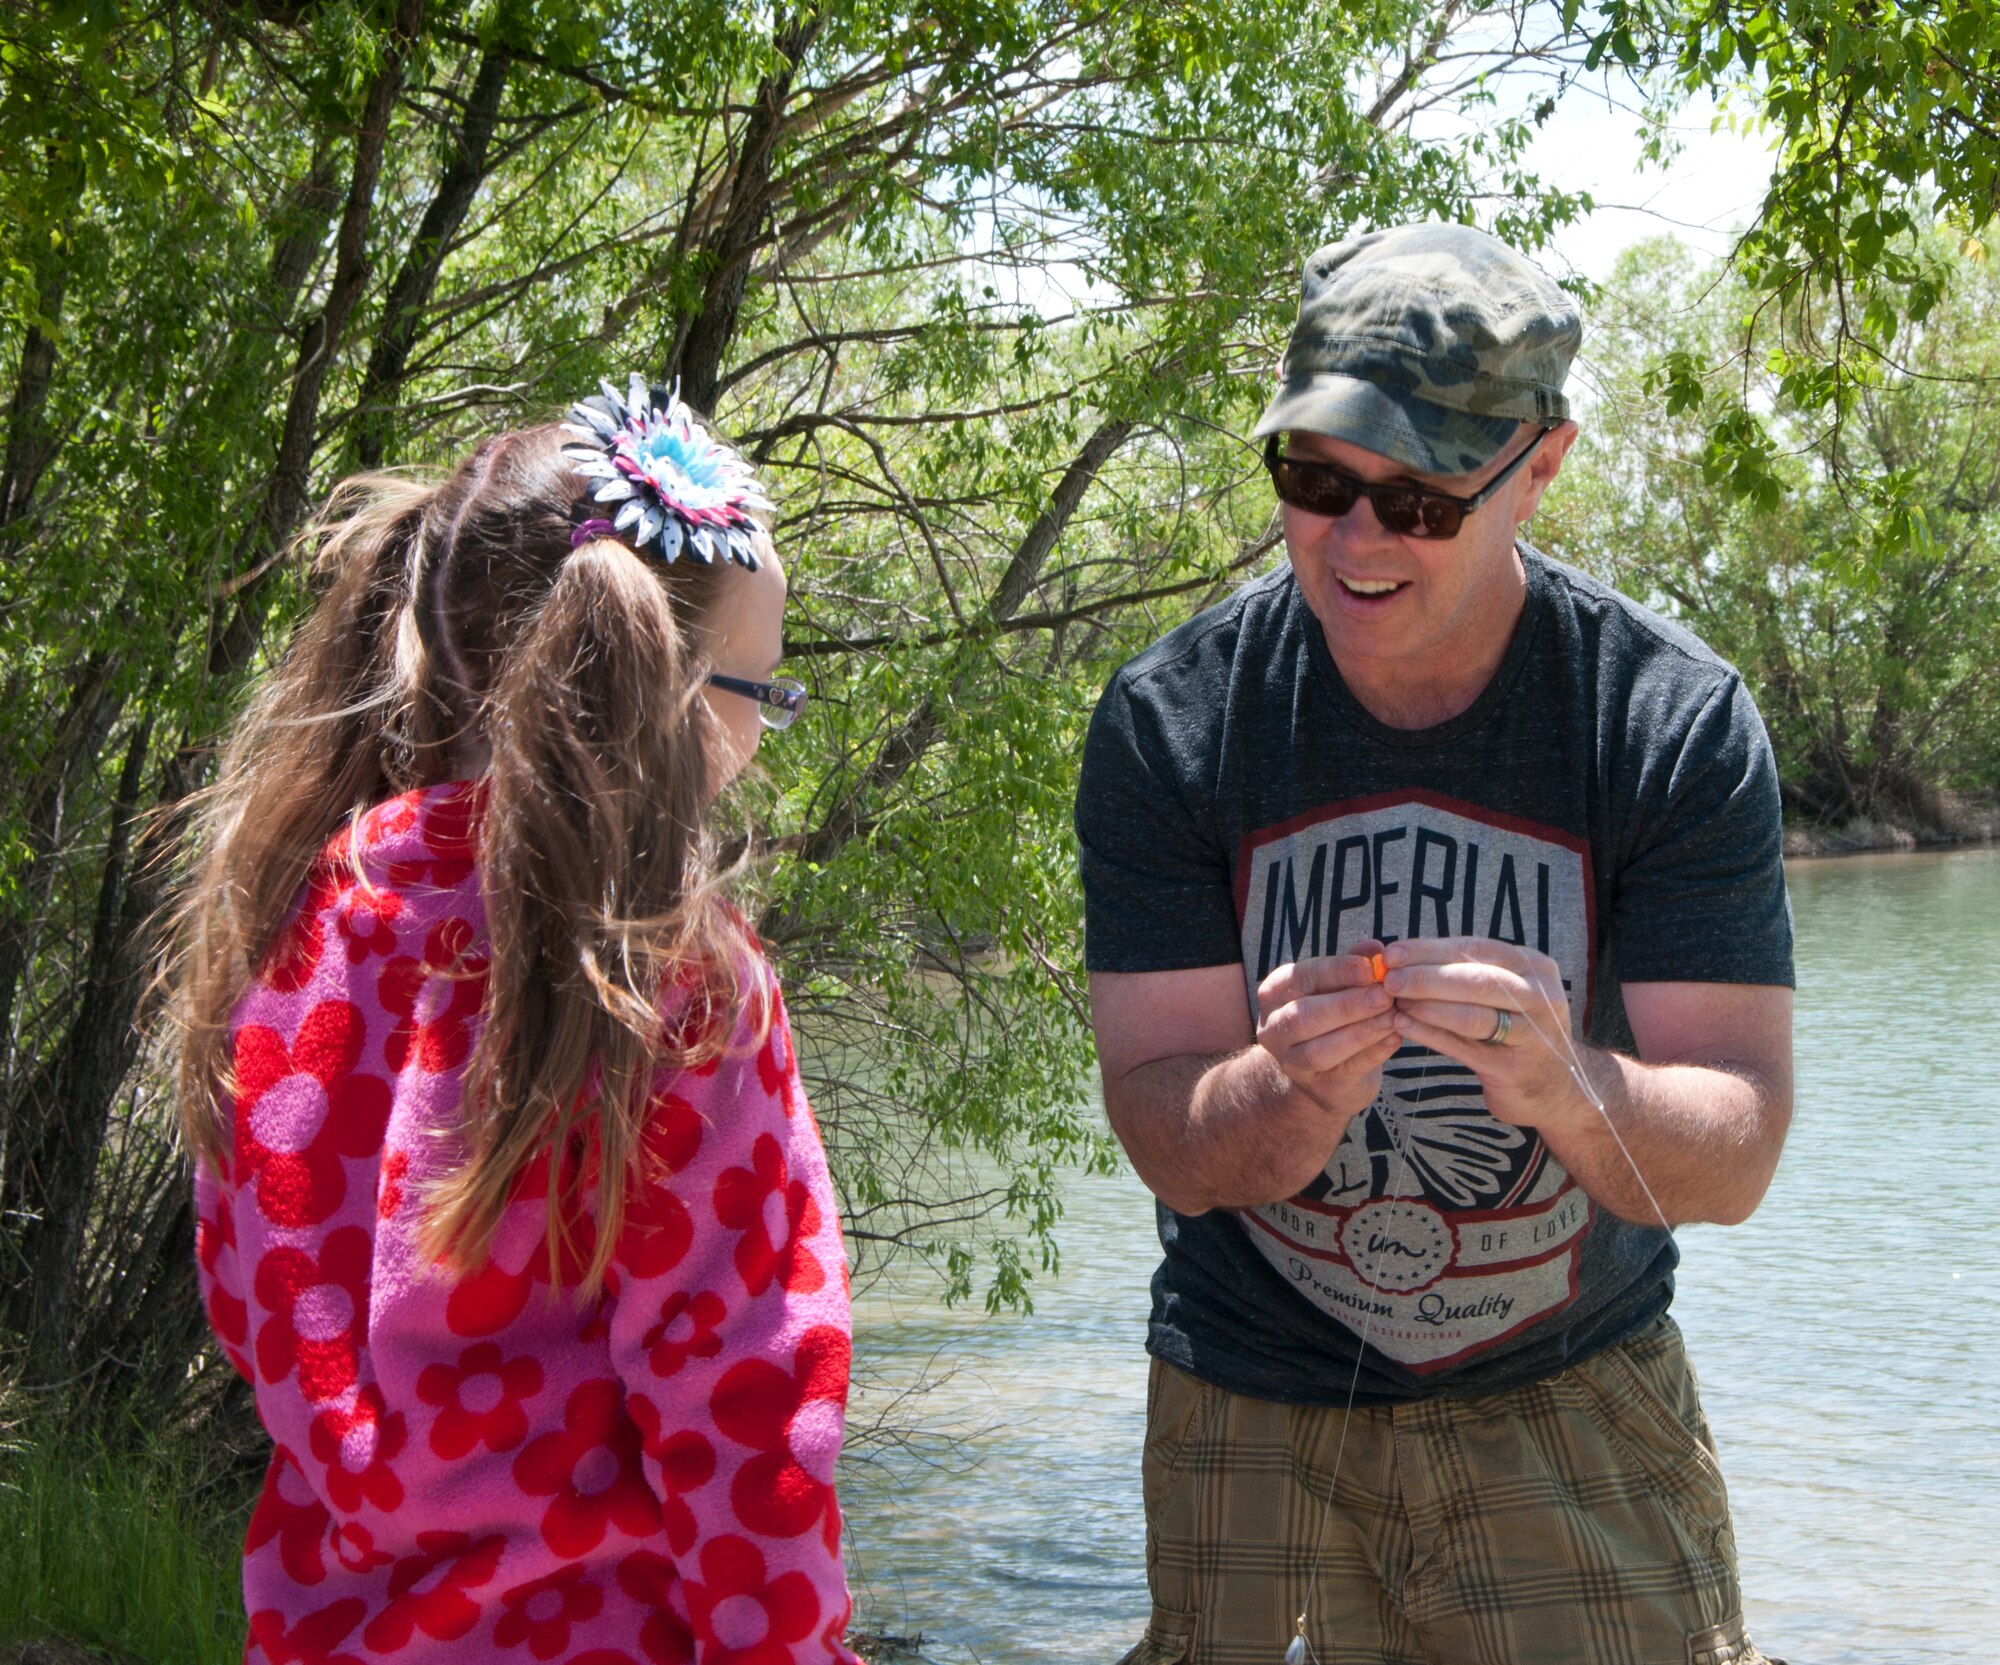 Scott, son of Retired Lt. Col. Jim McHugh, shows his daughter, Frida, how to attach a bobber to a fishing line during the Father's Day Fishing Derby June 15, 2014, at the F.E. Warren Base Lake. (U.S. Air Force photo by Airman 1st Class Jason Wiese)